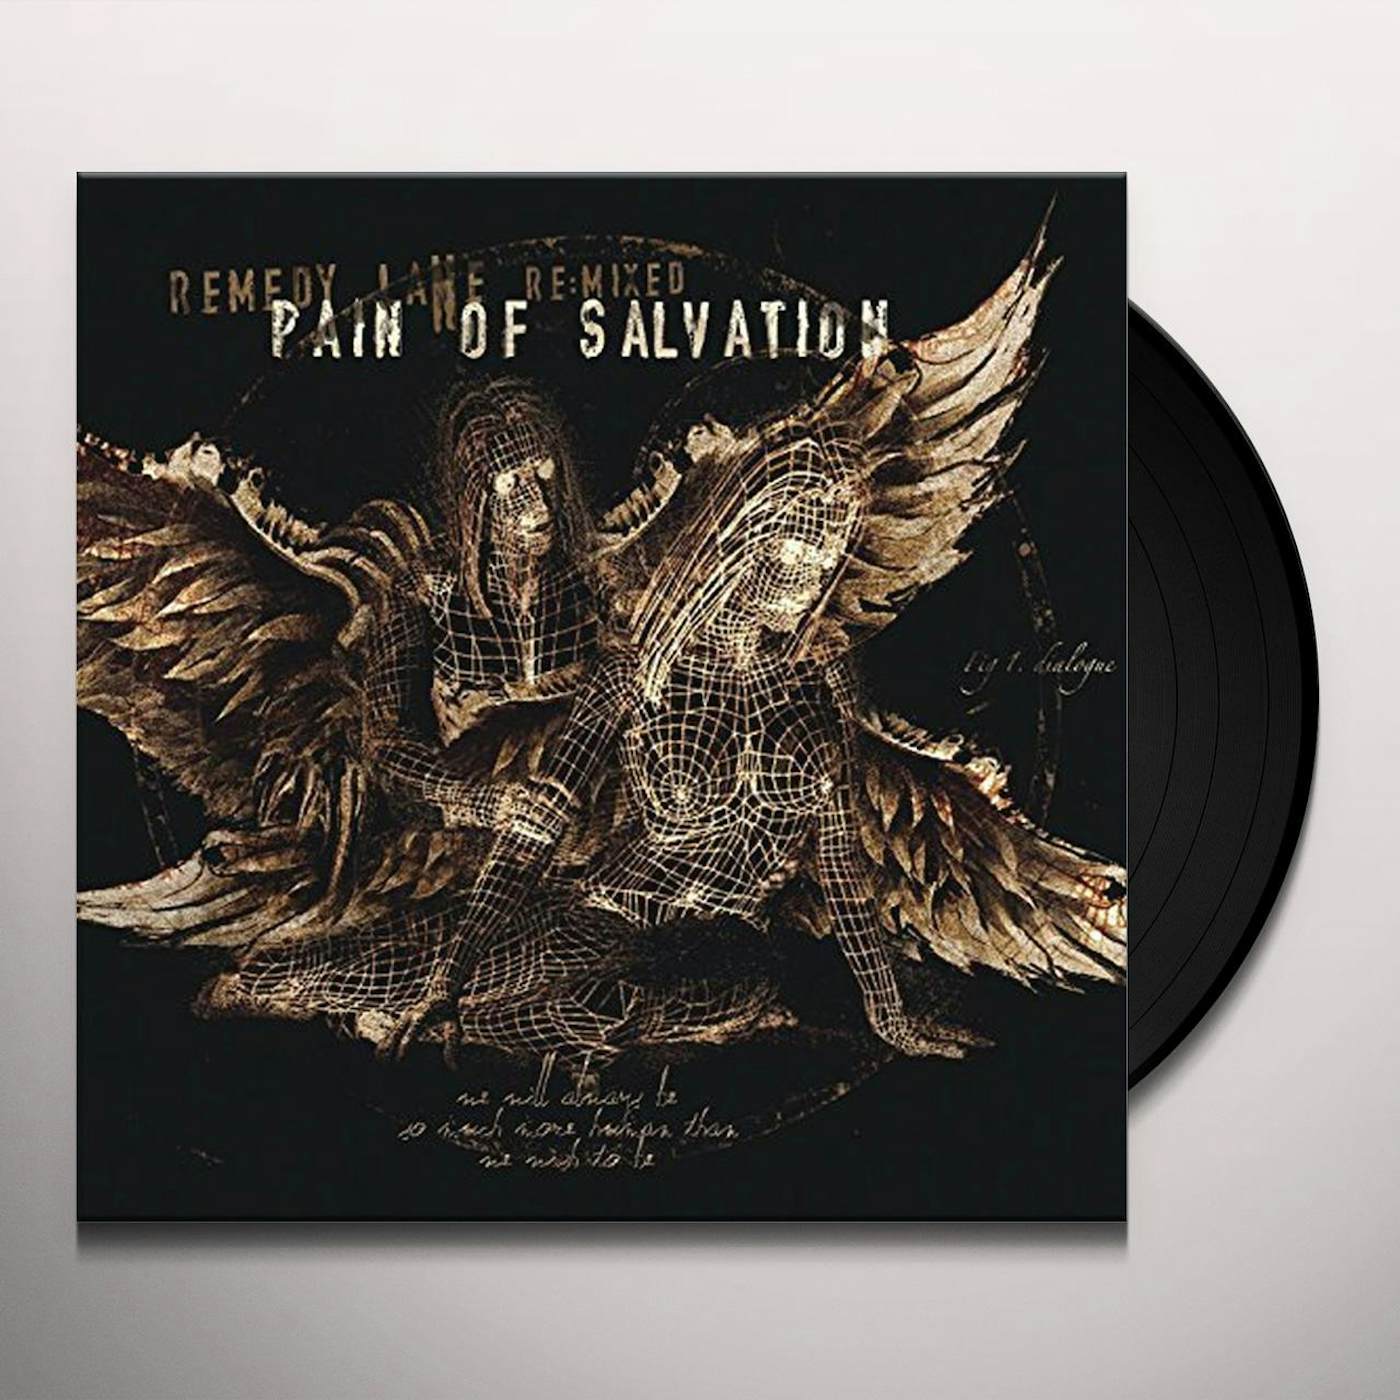 Pain of Salvation REMEDY LANE RE:VISITED (RE:MIXED & RE:LIVED) Vinyl Record